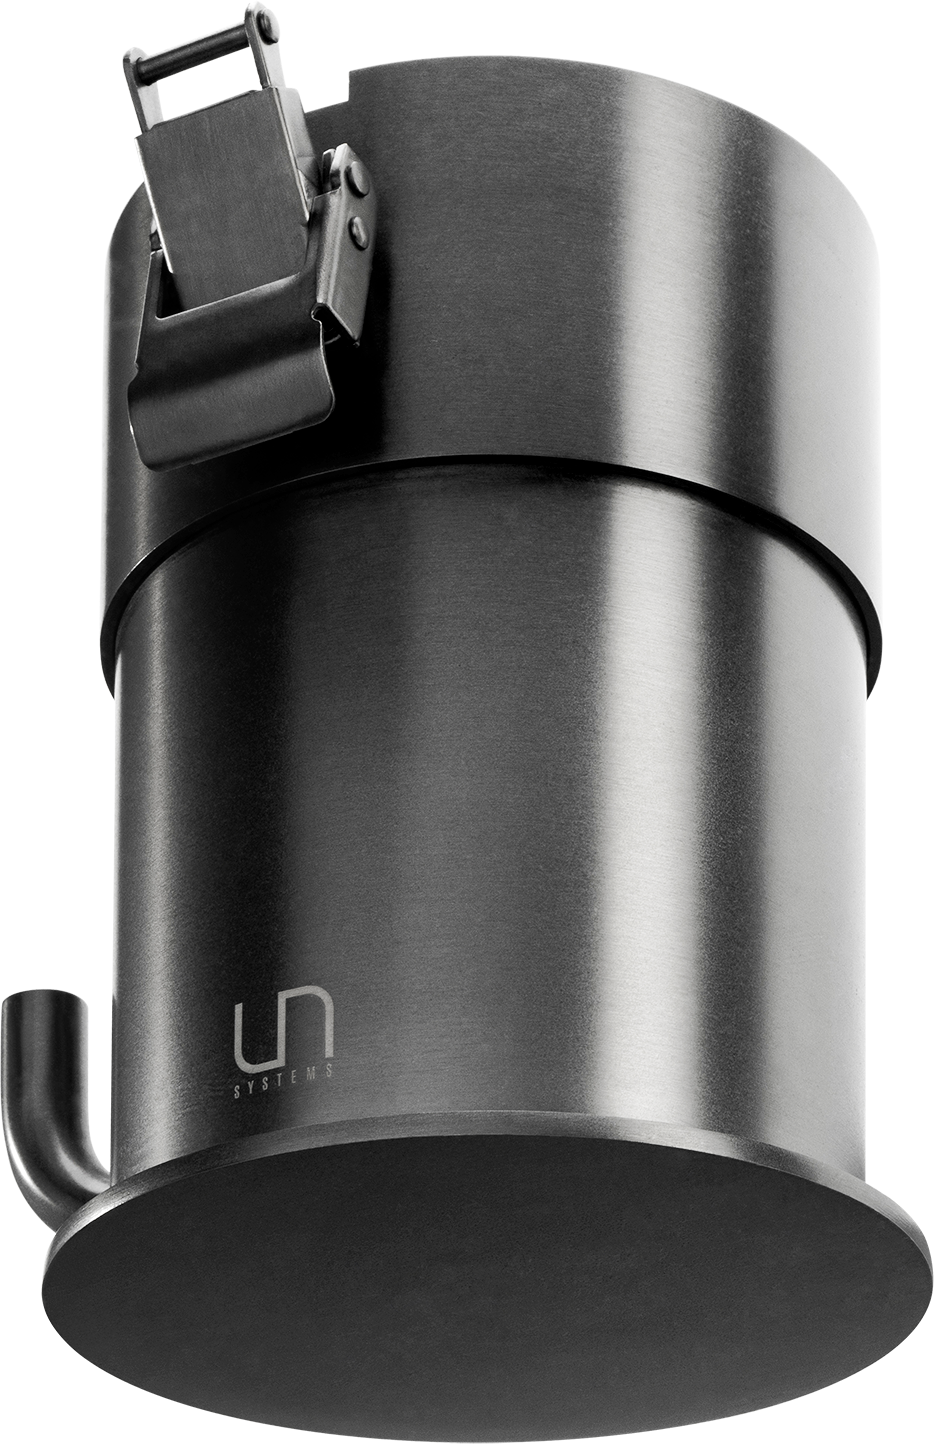 bottom-up view of the ultum nature sytems 32 oz blitz stainless steel canister filter without the lid